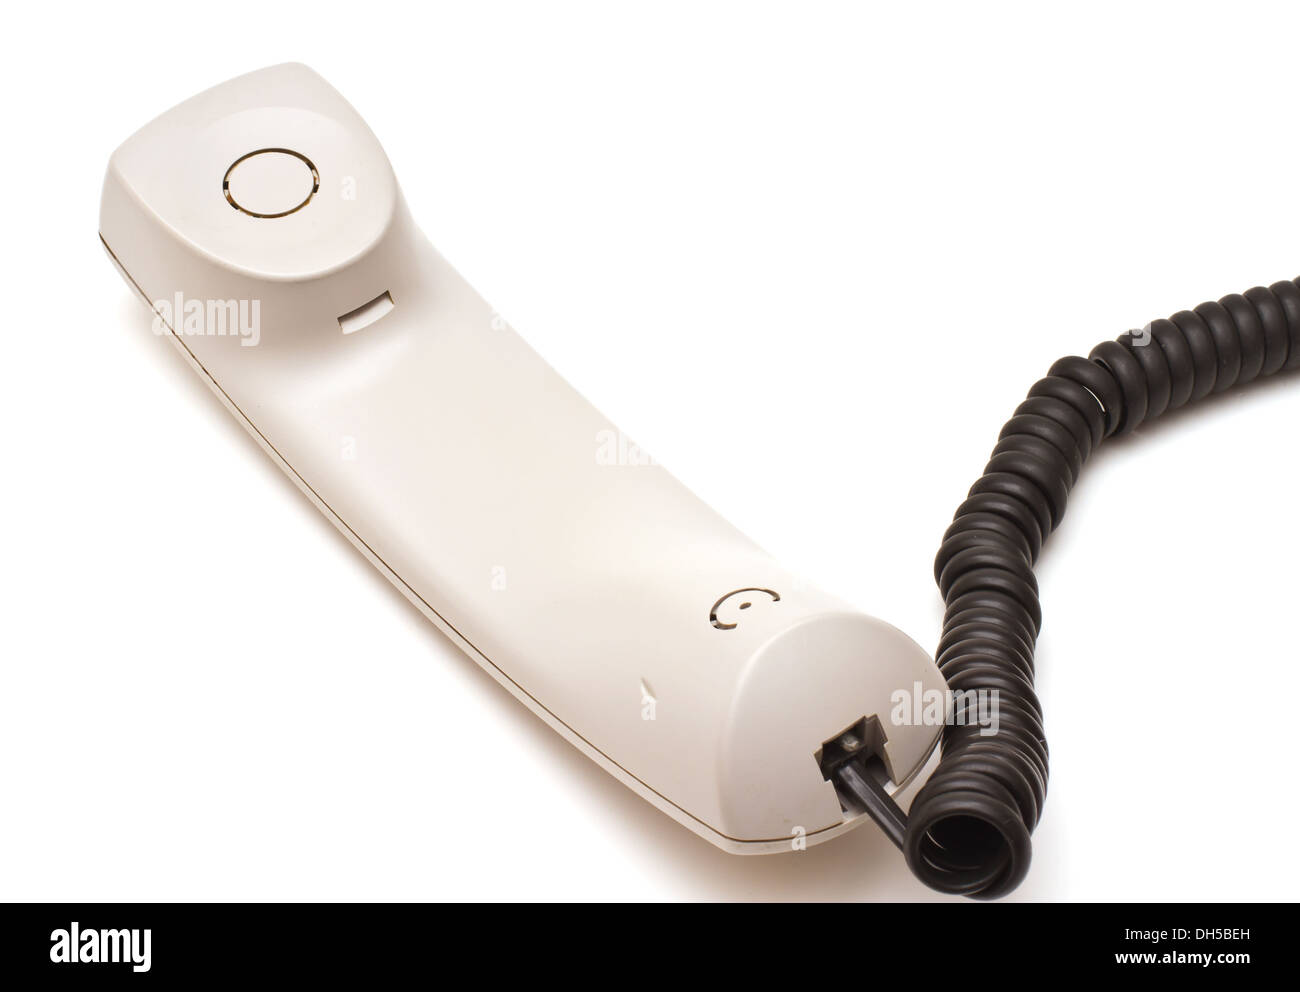 Telephone receiver and cord on white Stock Photo